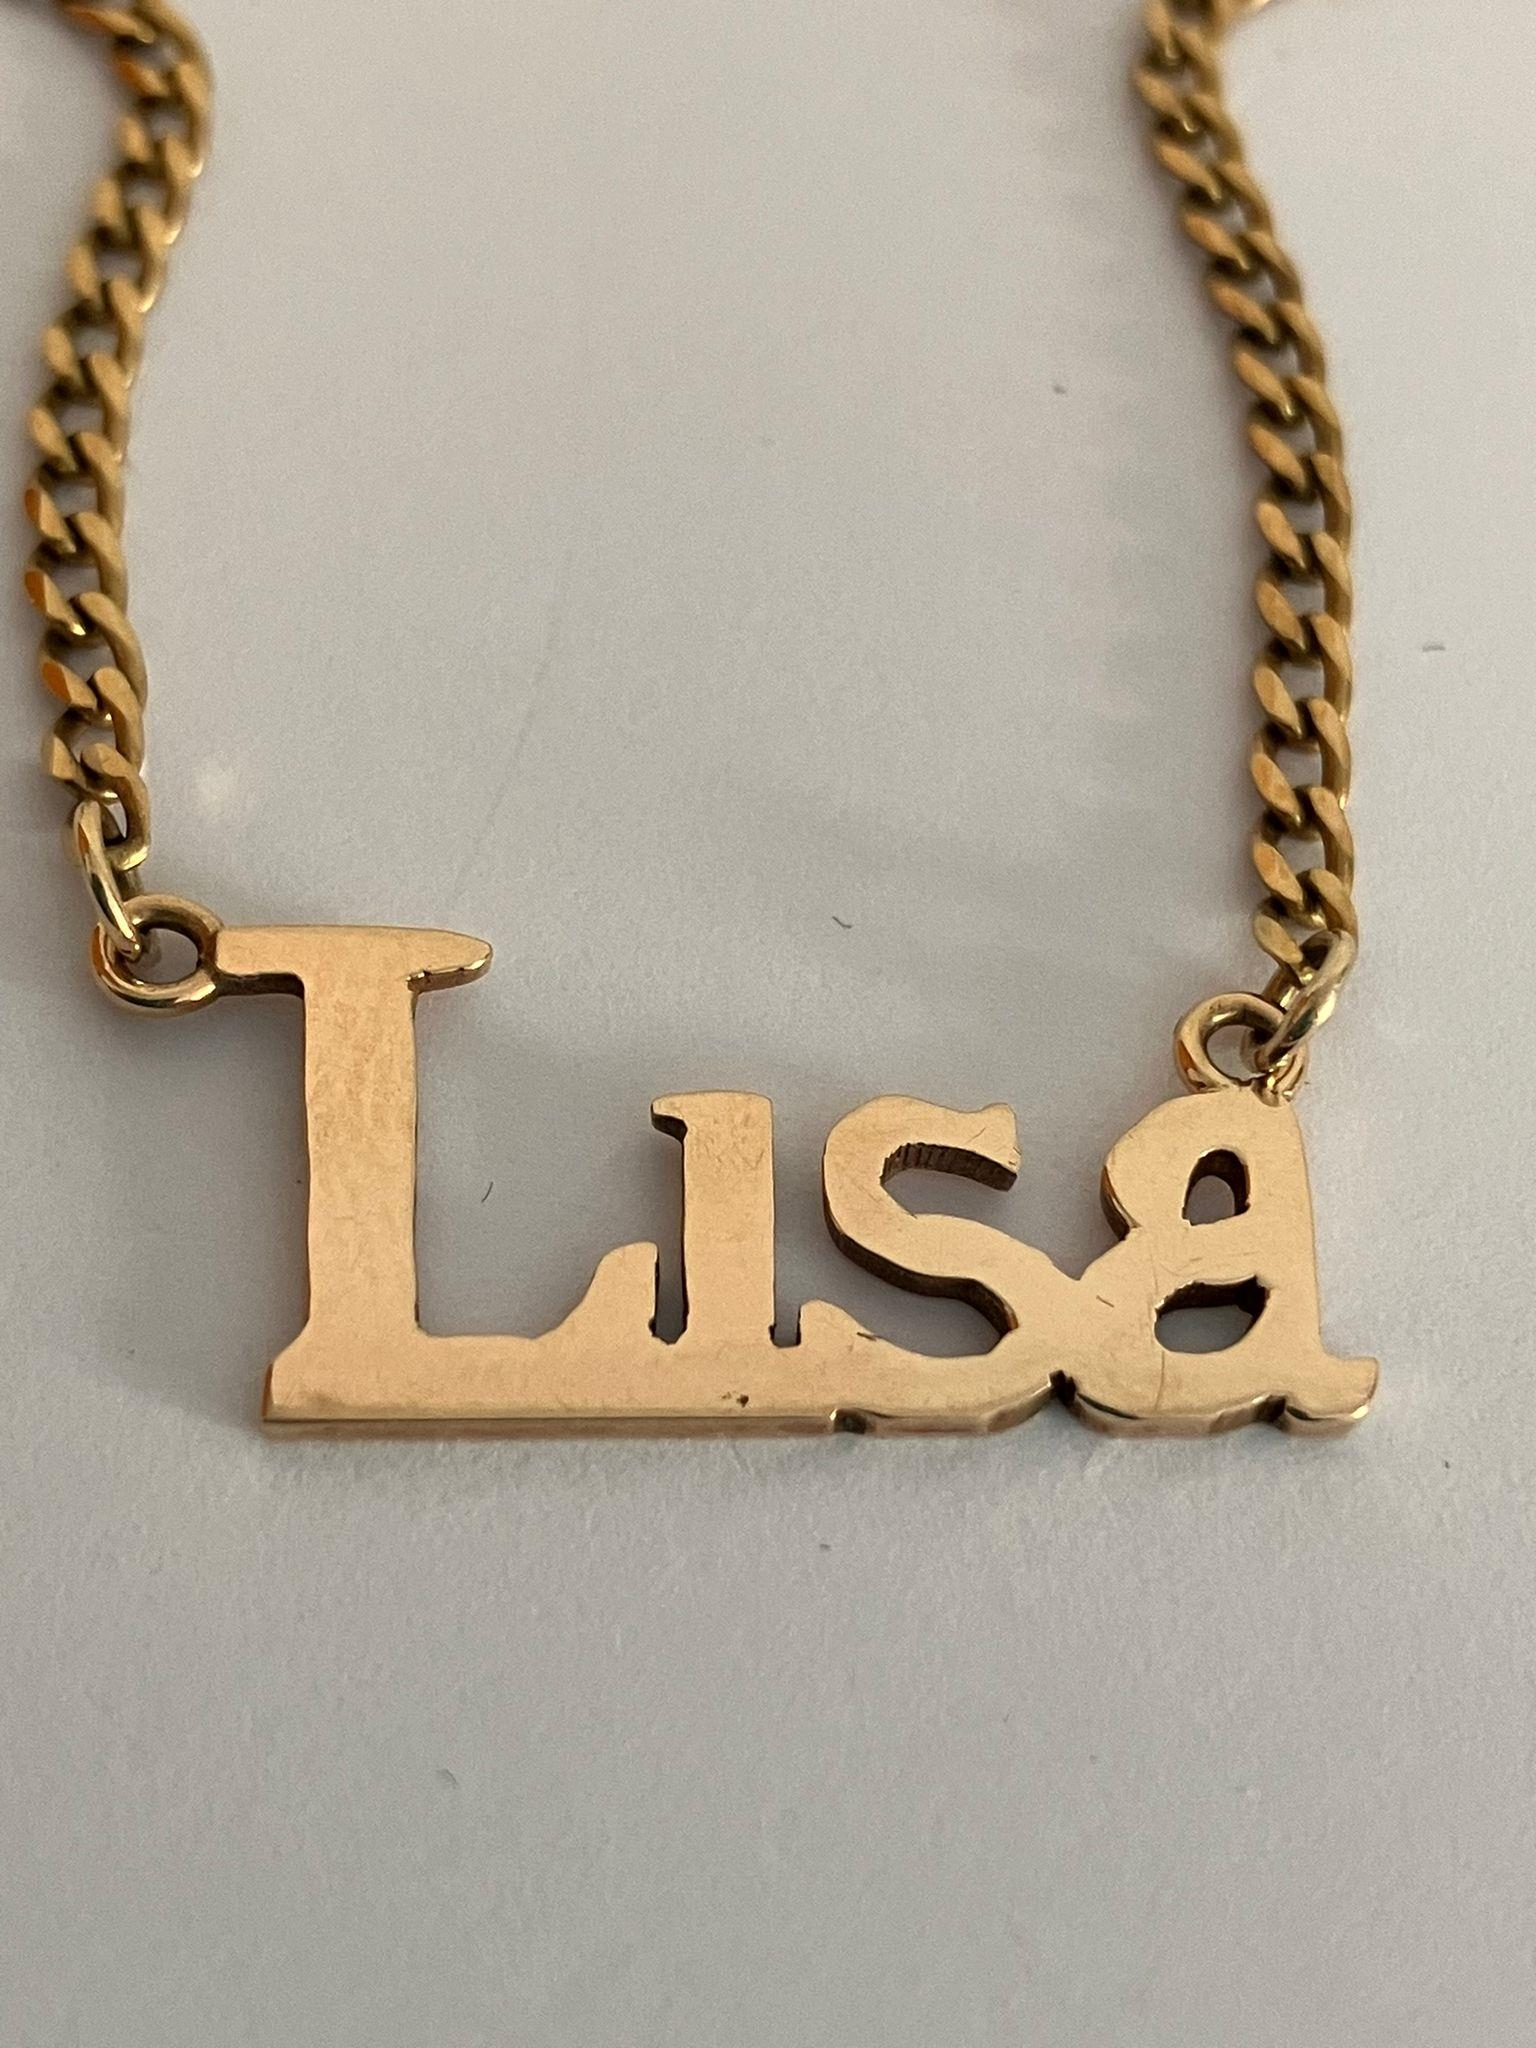 9 carat GOLD, CURB CHAIN NECKLACE with name of LISA. Full UK hallmark. 5.7 grams. 46 cm. - Image 8 of 11